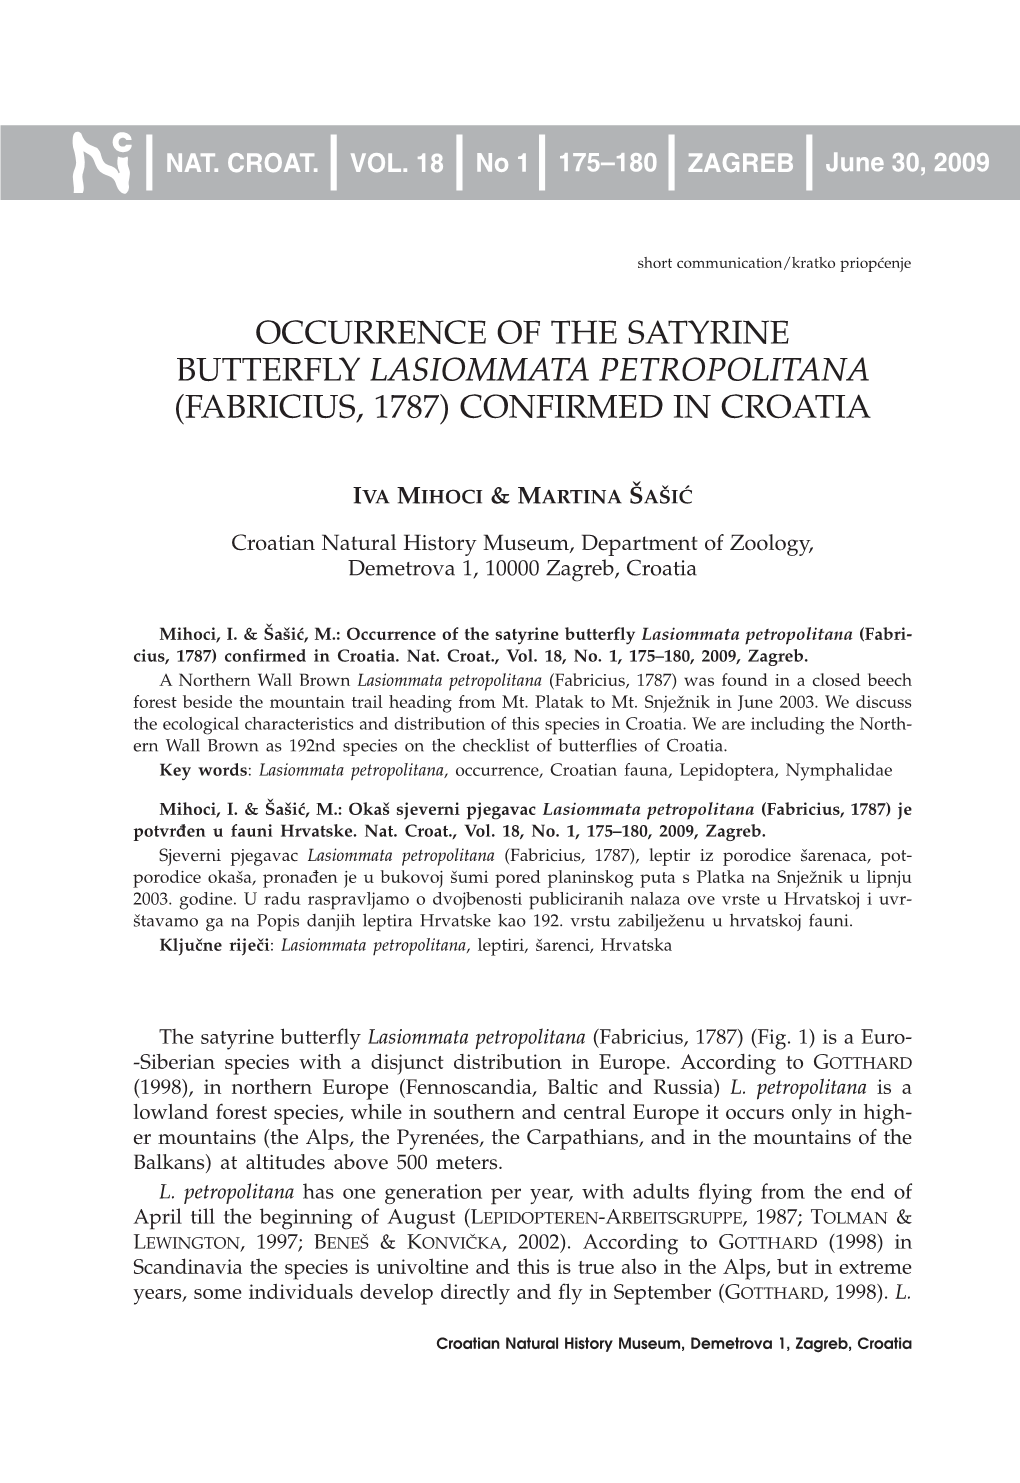 Occurrence of the Satyrine Butterfly Lasiommata Petropolitana (Fabricius, 1787) Confirmed in Croatia